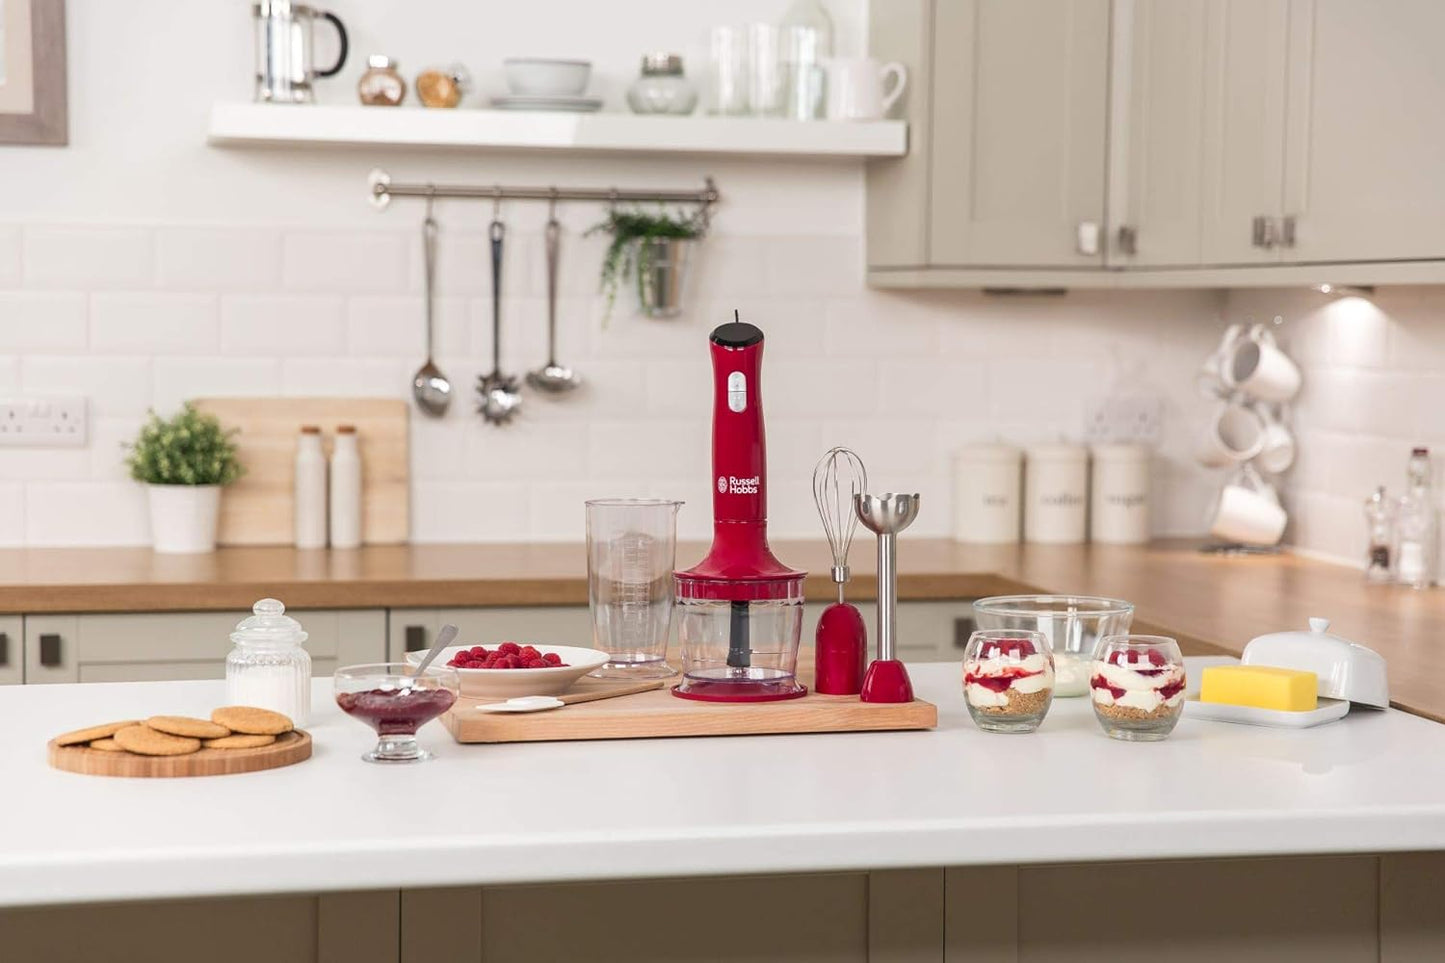 Russell Hobbs Hand Blender [3-in-1: Purée Stick/Chopper, Mixer & Whisk Attachment] Desire Red (BPA-Free & Dishwasher Safe Accessories, for Smoothie, Soups, Sauces, Yoghurt Baby Food) 24700-56